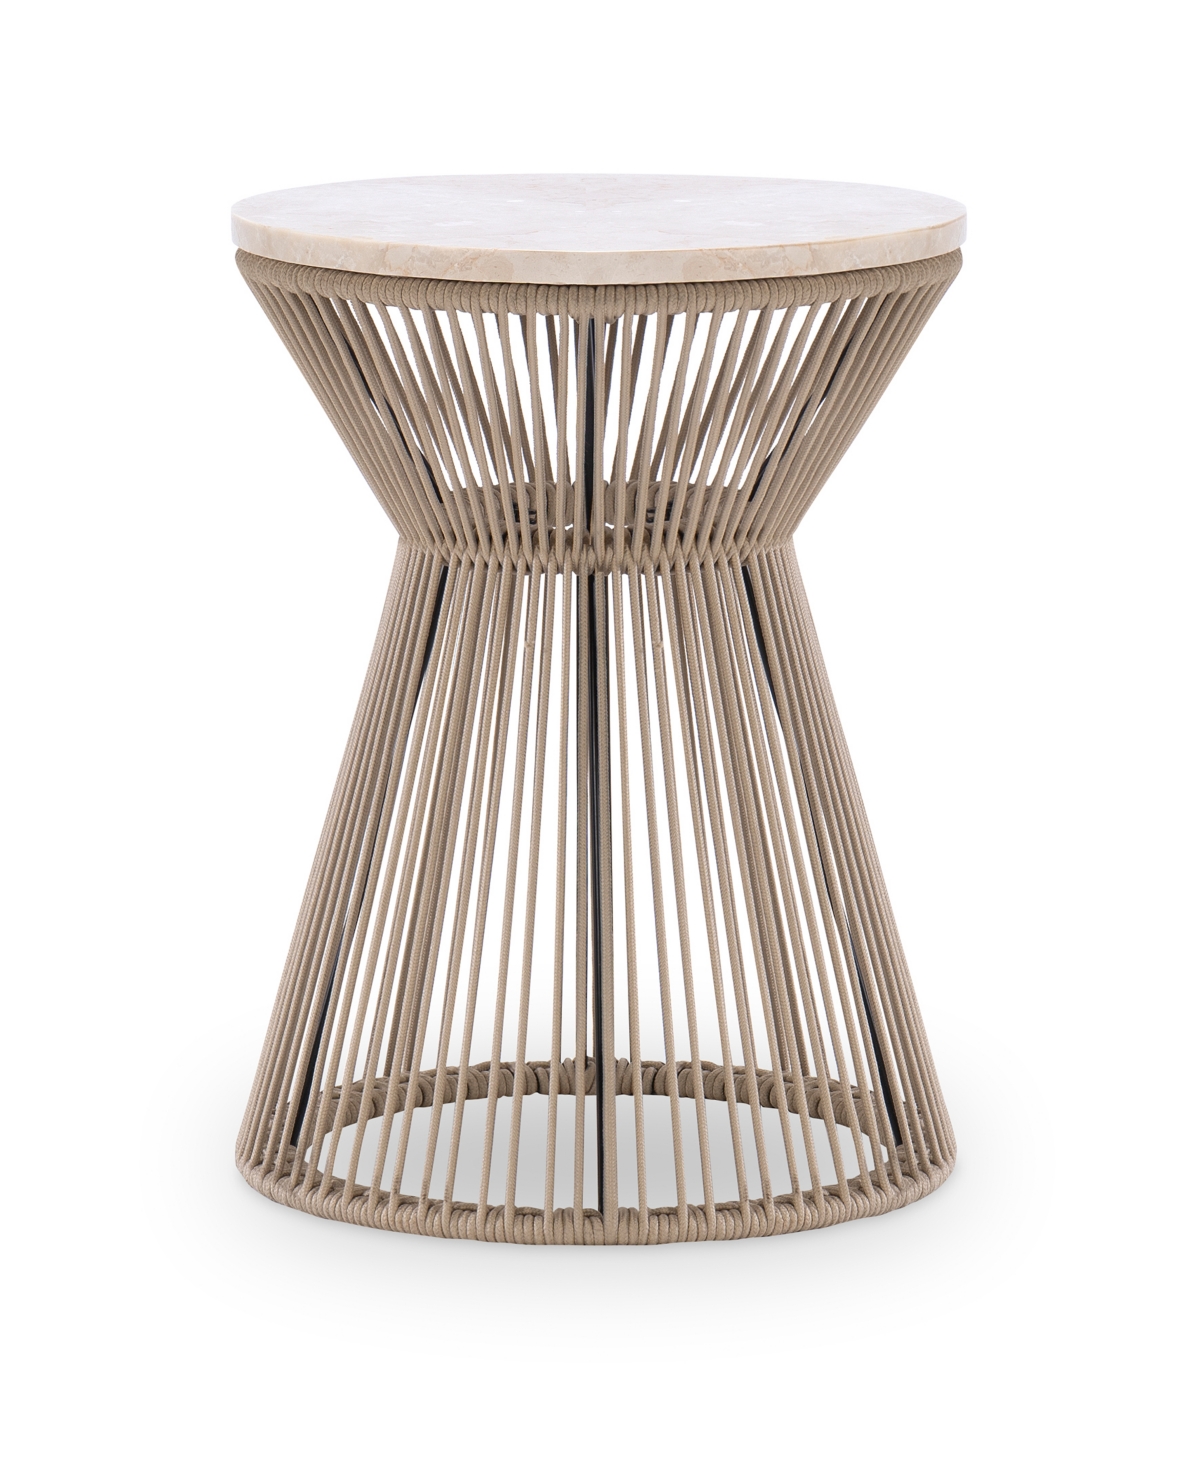 Furniture Biscayne 18" Wood With Travertine Top Round Rope End Table In Malabar With Alabaster Fronts